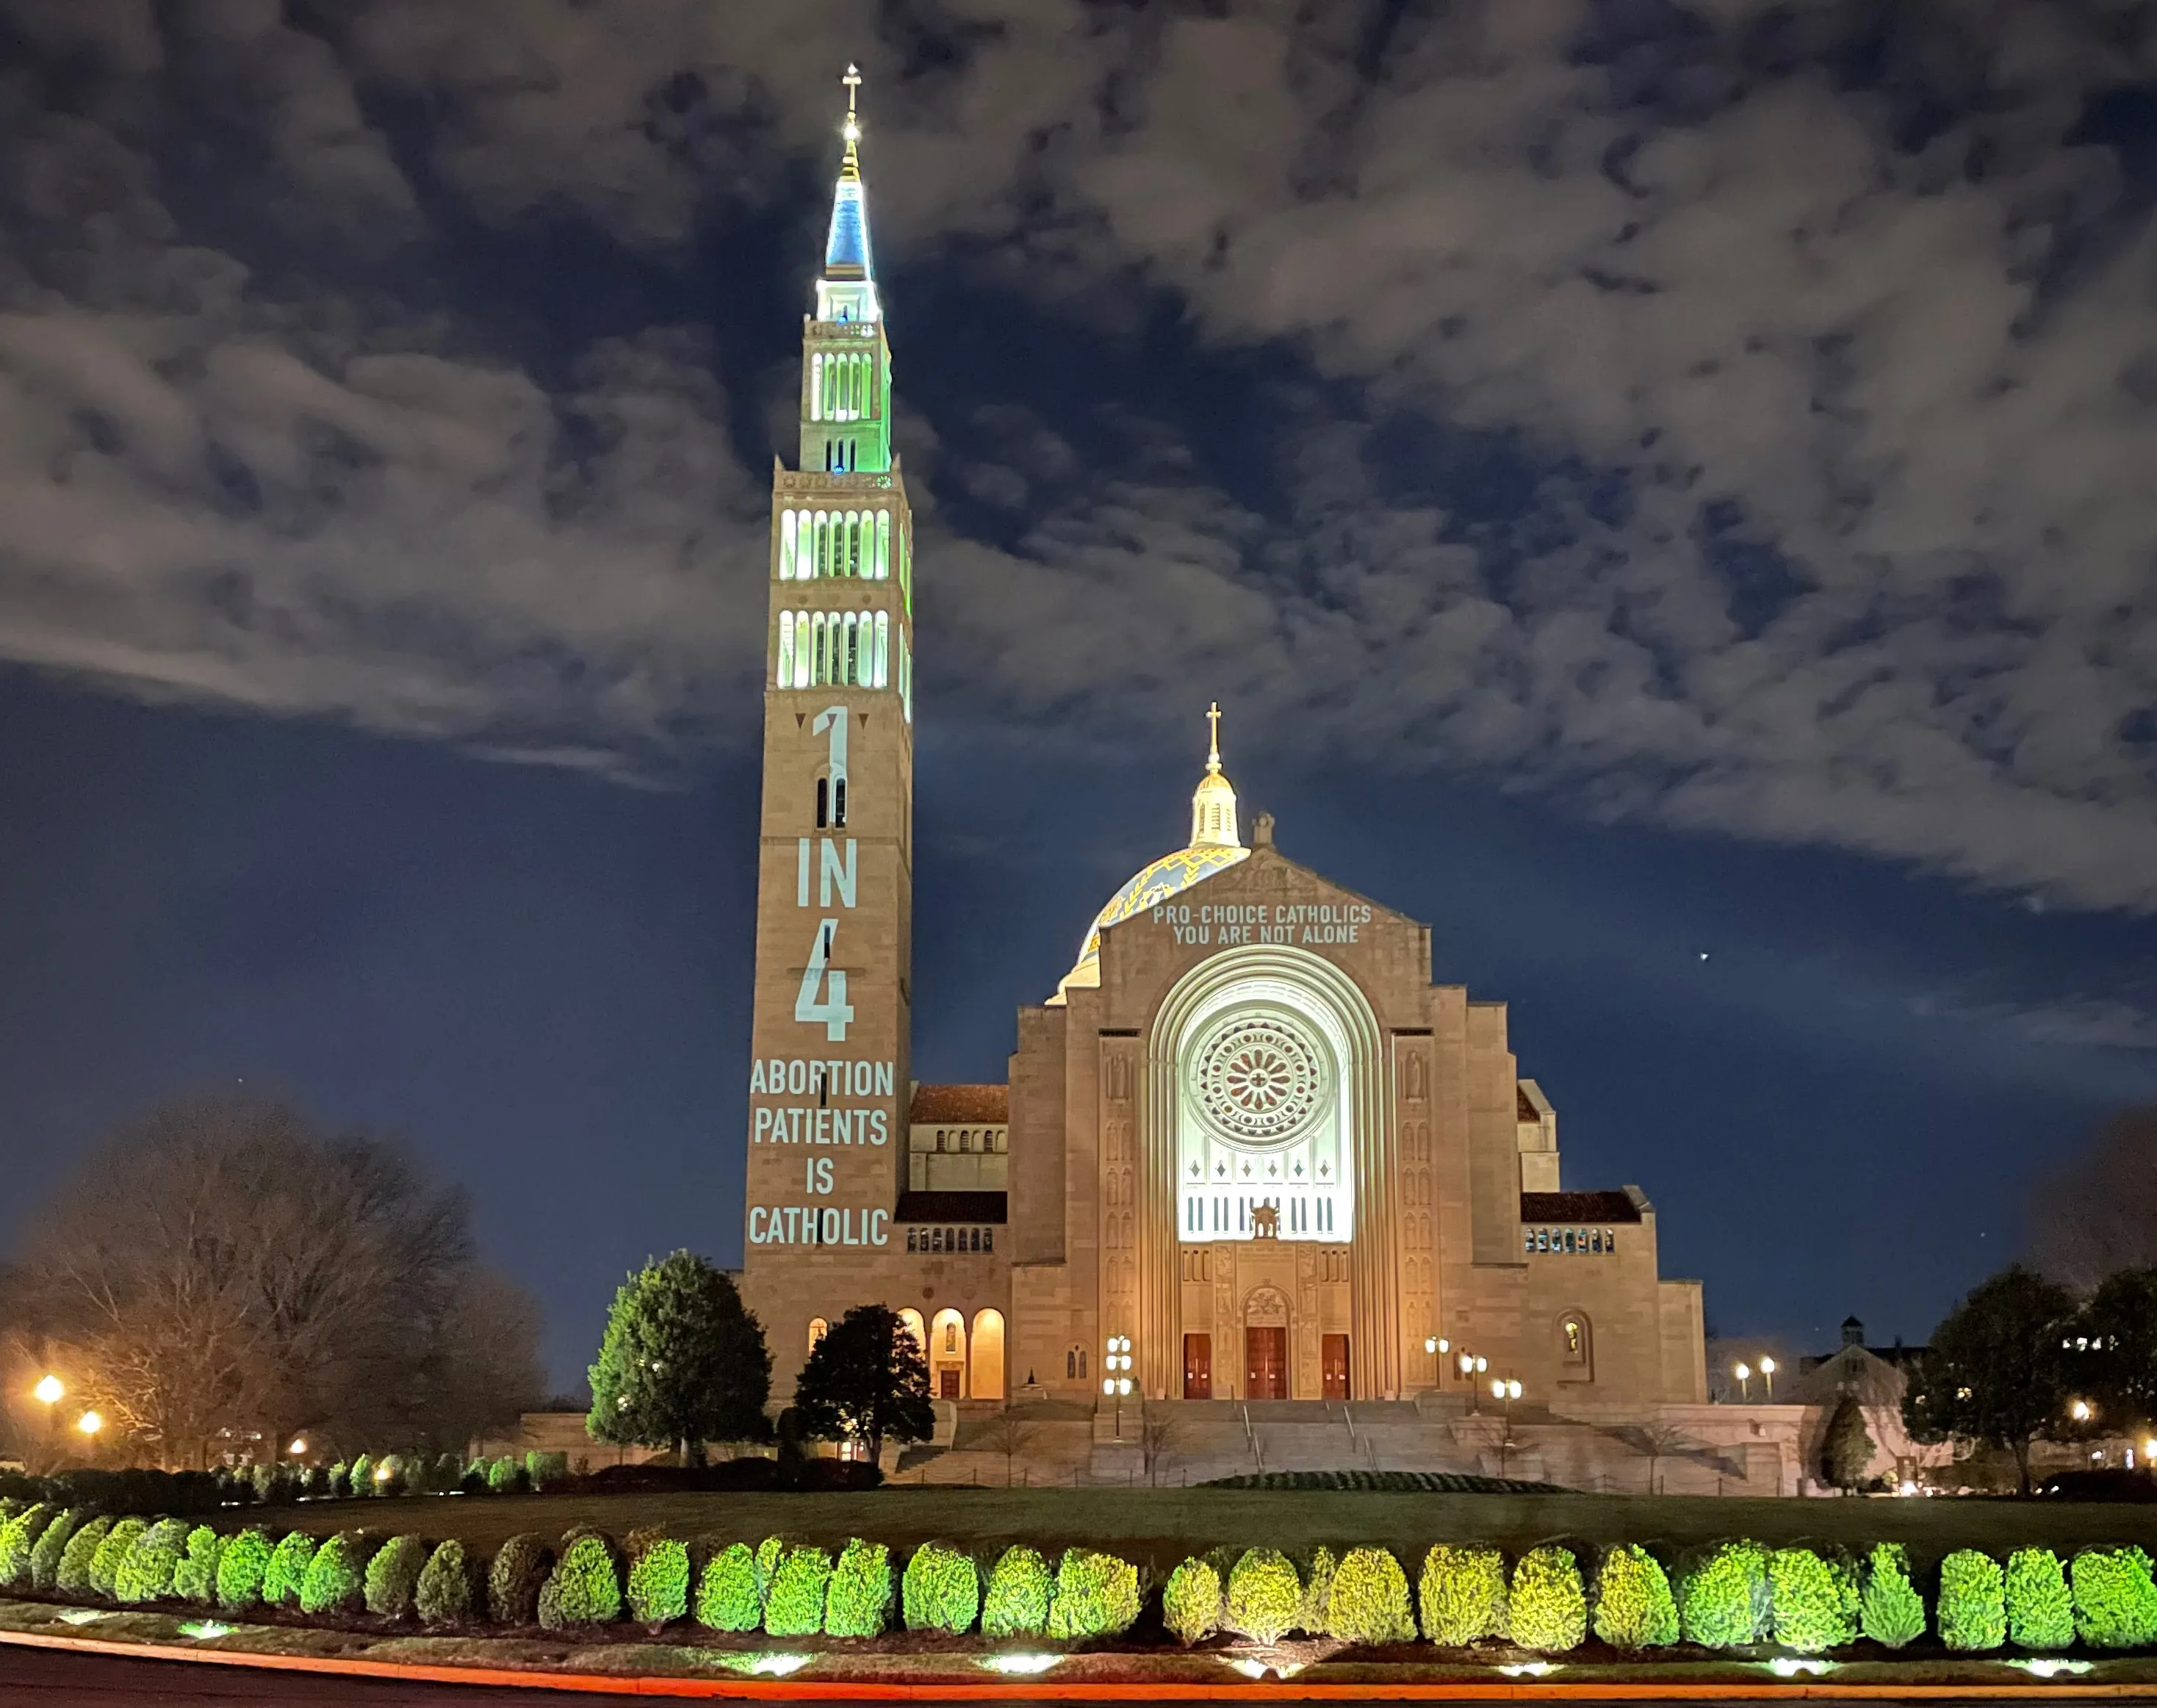 Pro-choice messages projected onto the Basilica of the National Shrine of the Immaculate Conception in Washington, D.C., on Jan. 20, 2022.?w=200&h=150